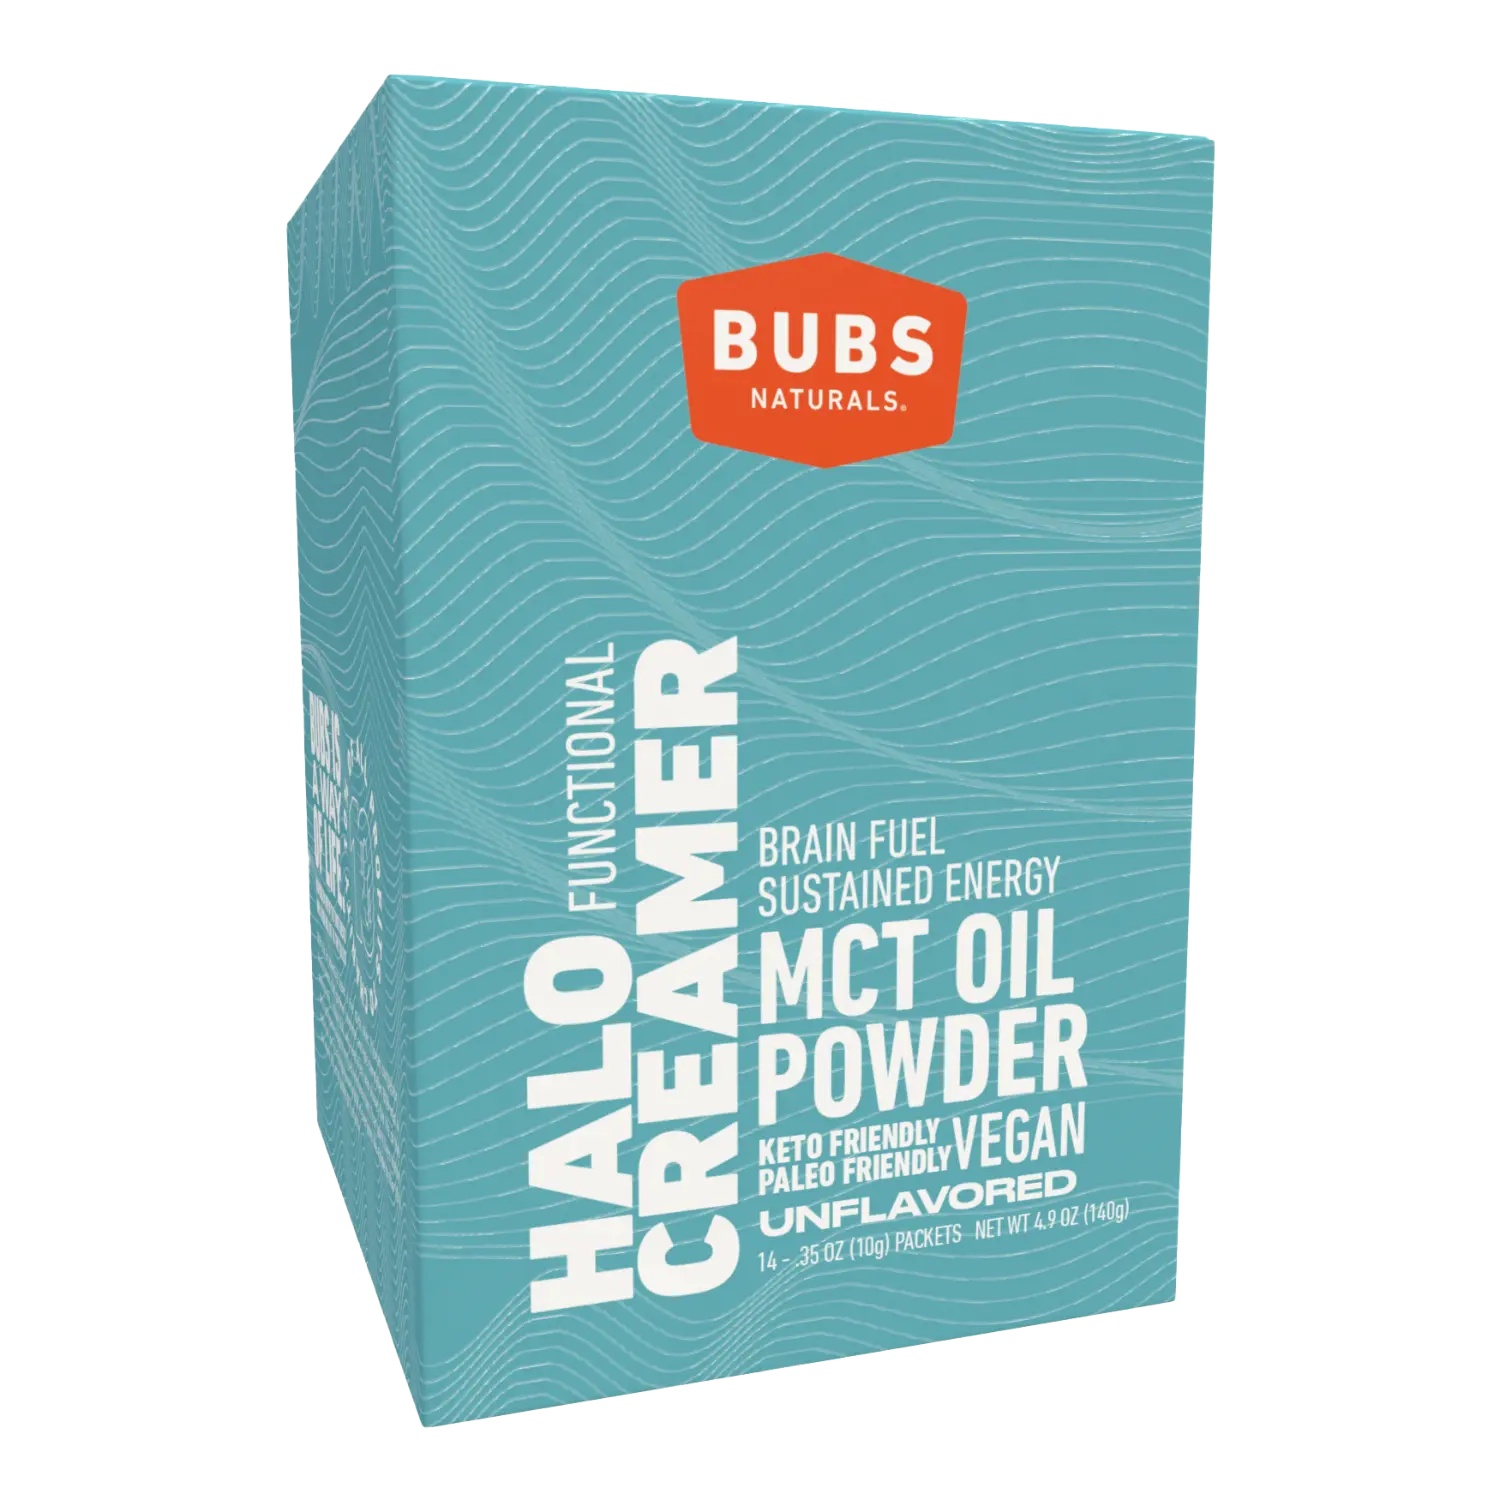 BUBS Naturals MCT Oil Powder, Vegan Halo Functional Creamer, 14ct travel pack, front